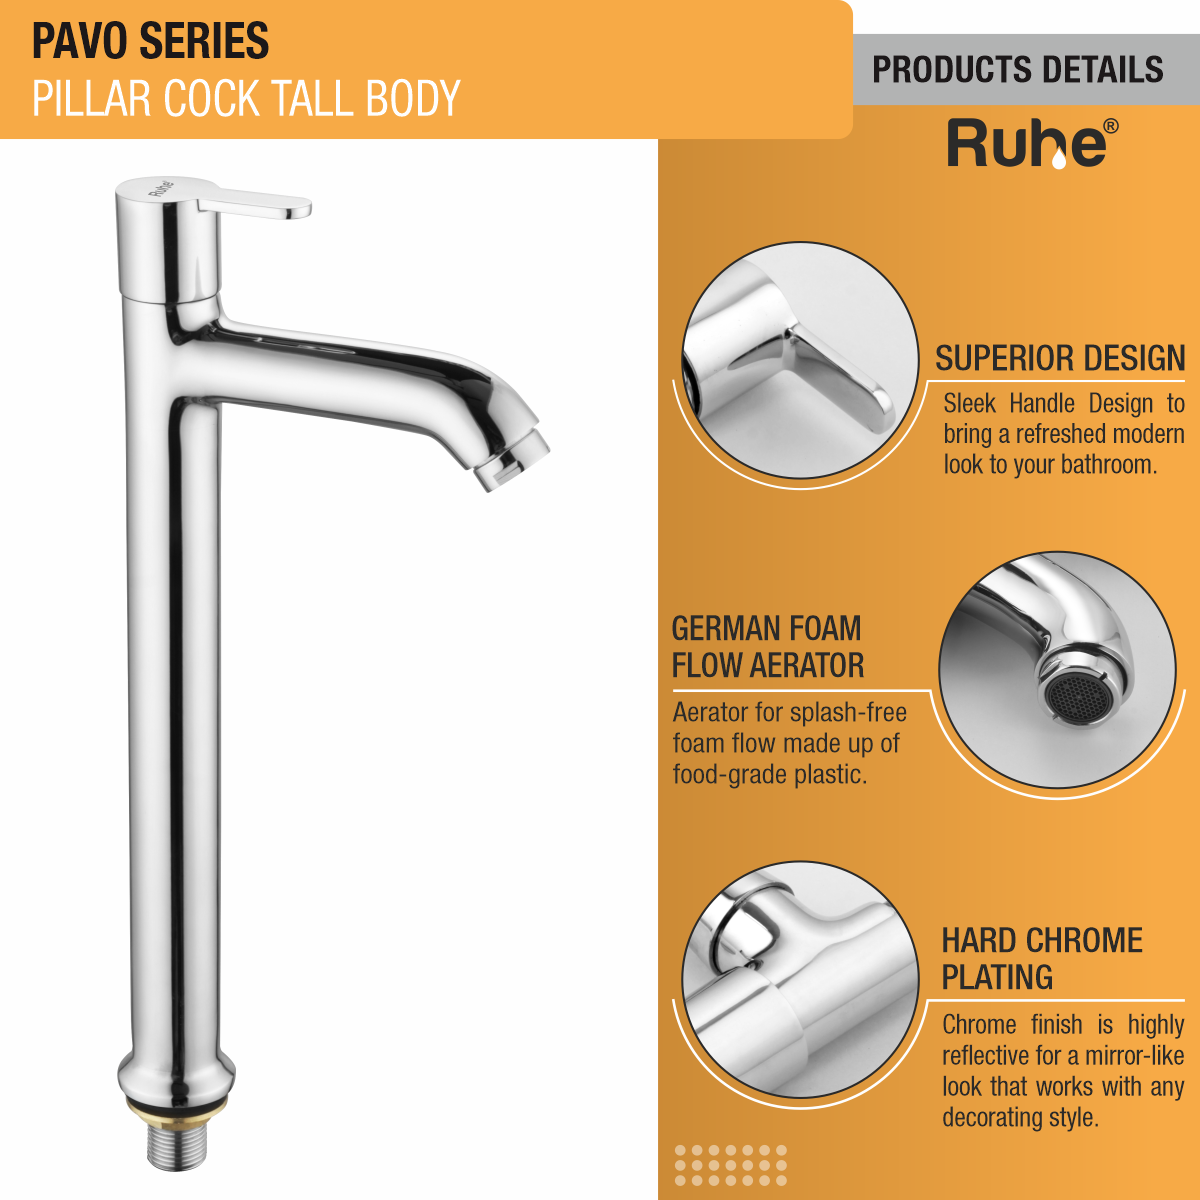 Pavo Pillar Tap Tall Body Faucet product details